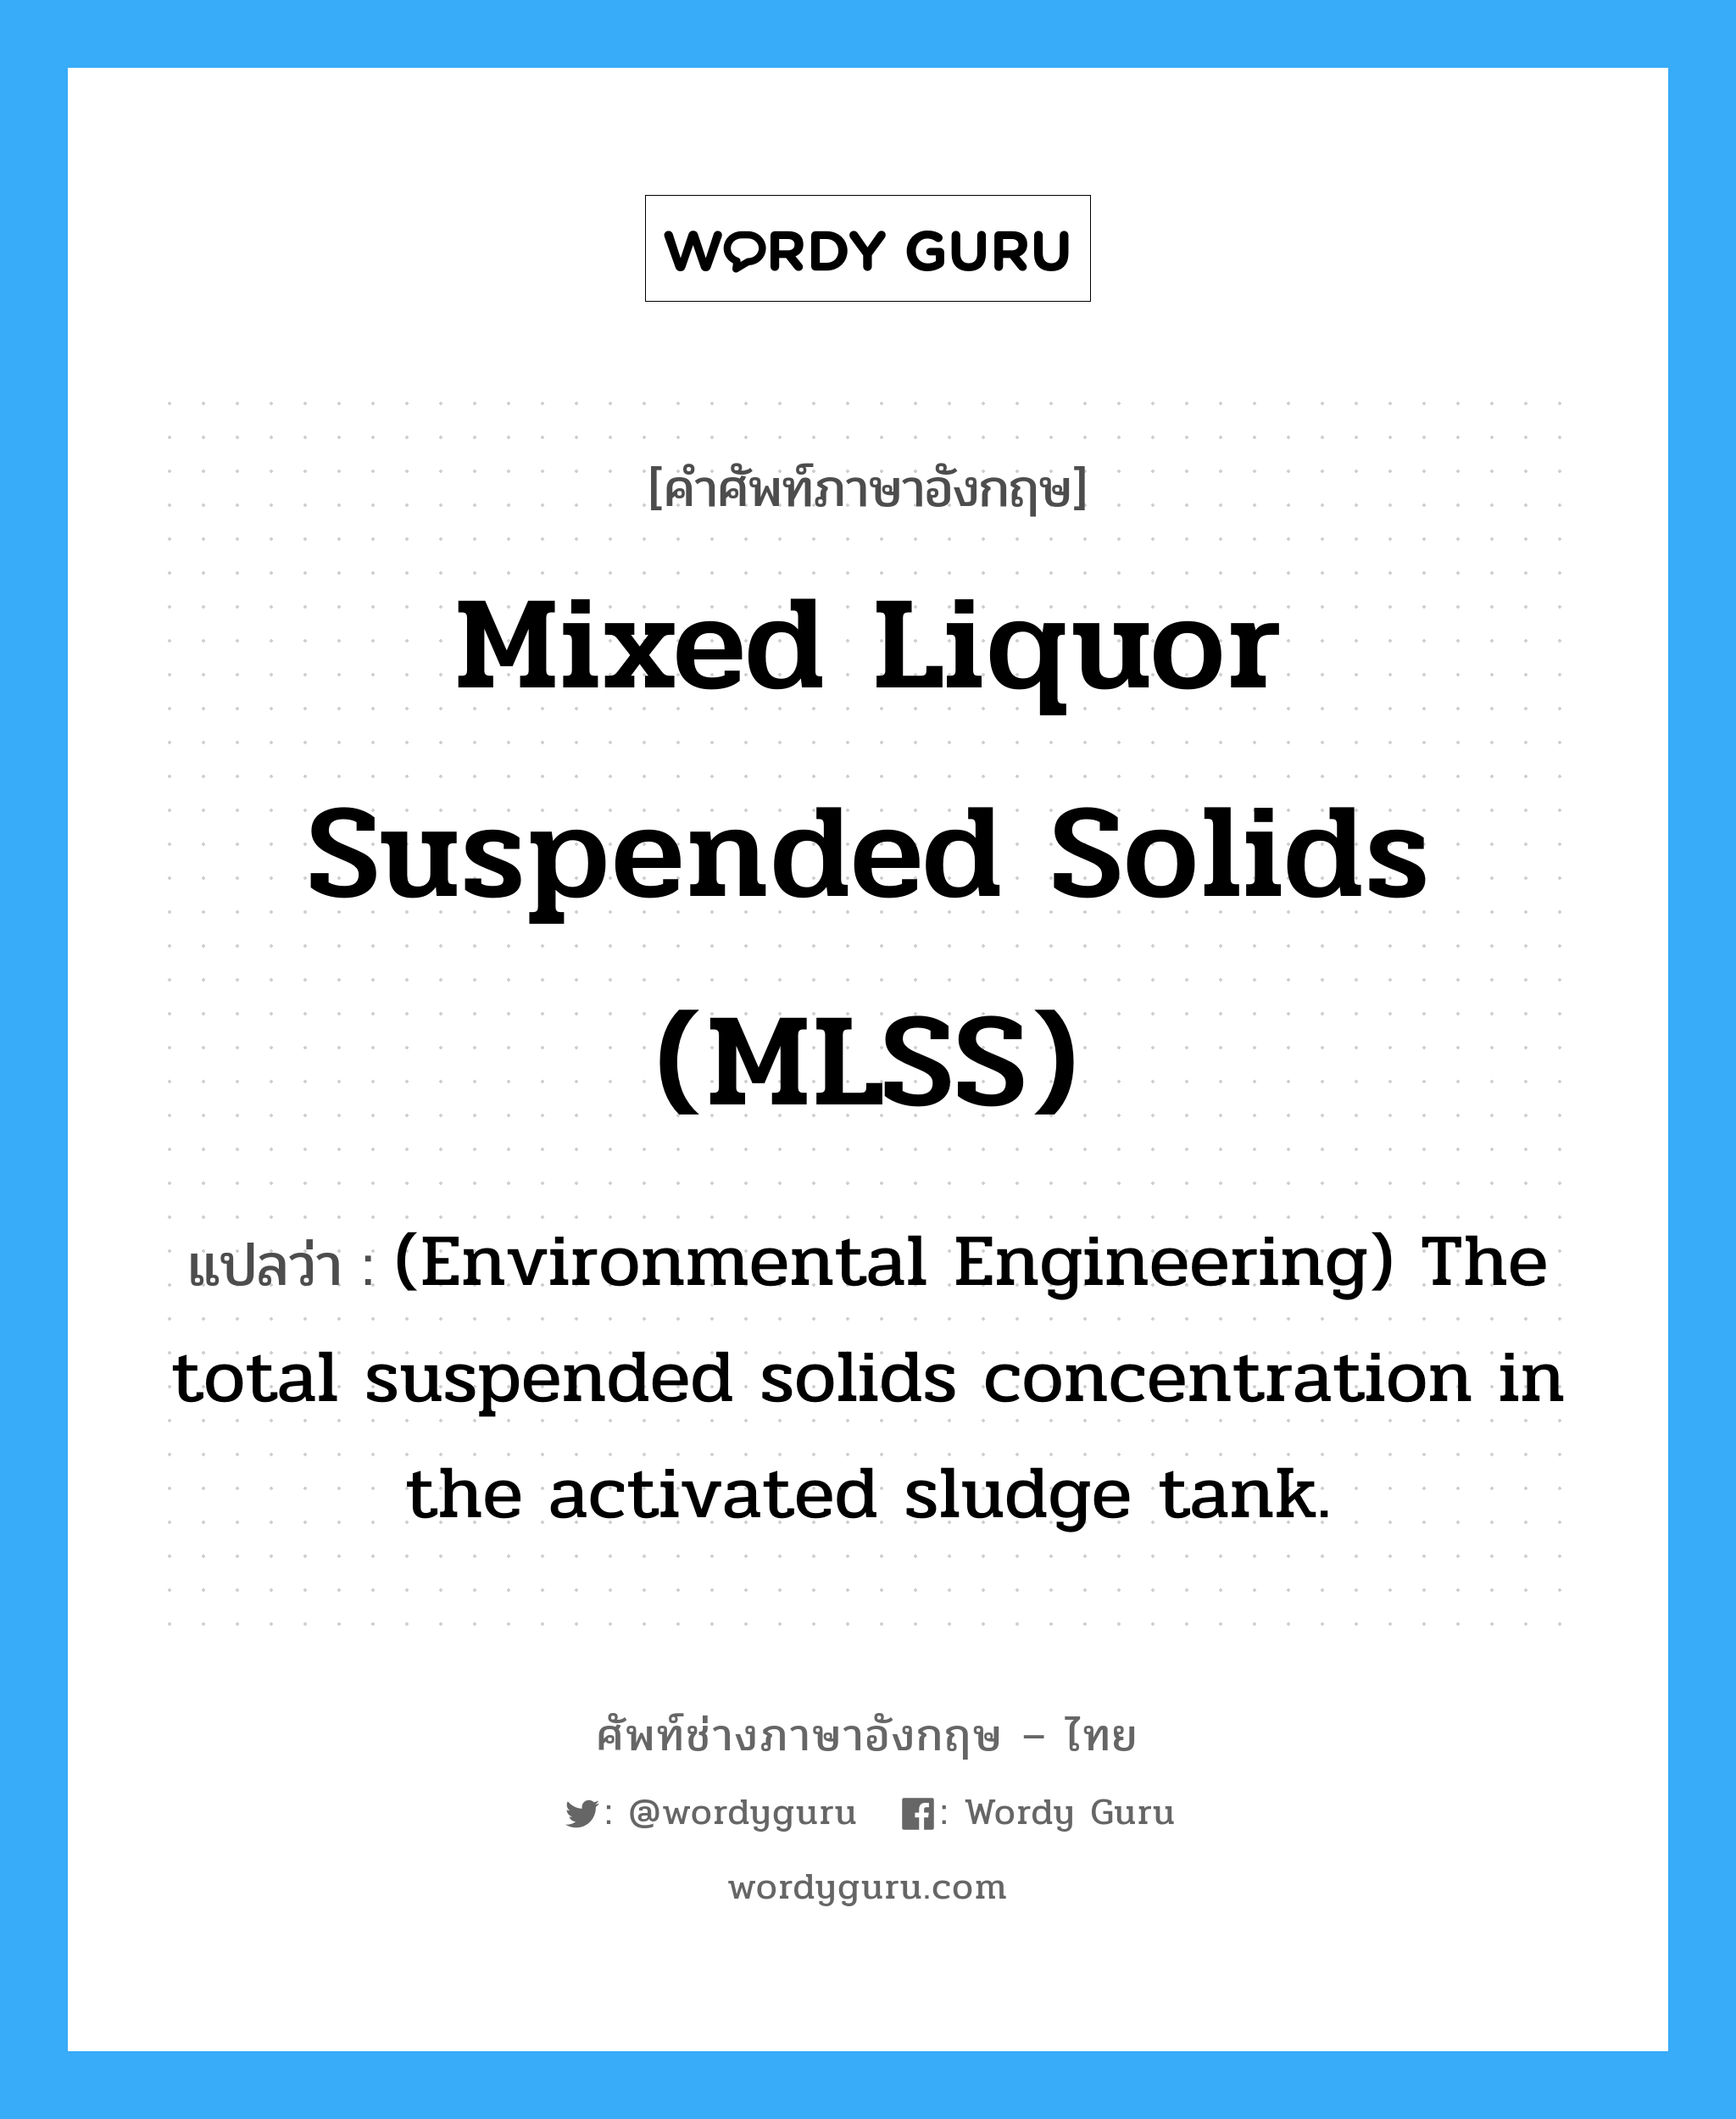 Mixed liquor suspended solids (MLSS) แปลว่า?, คำศัพท์ช่างภาษาอังกฤษ - ไทย Mixed liquor suspended solids (MLSS) คำศัพท์ภาษาอังกฤษ Mixed liquor suspended solids (MLSS) แปลว่า (Environmental Engineering) The total suspended solids concentration in the activated sludge tank.